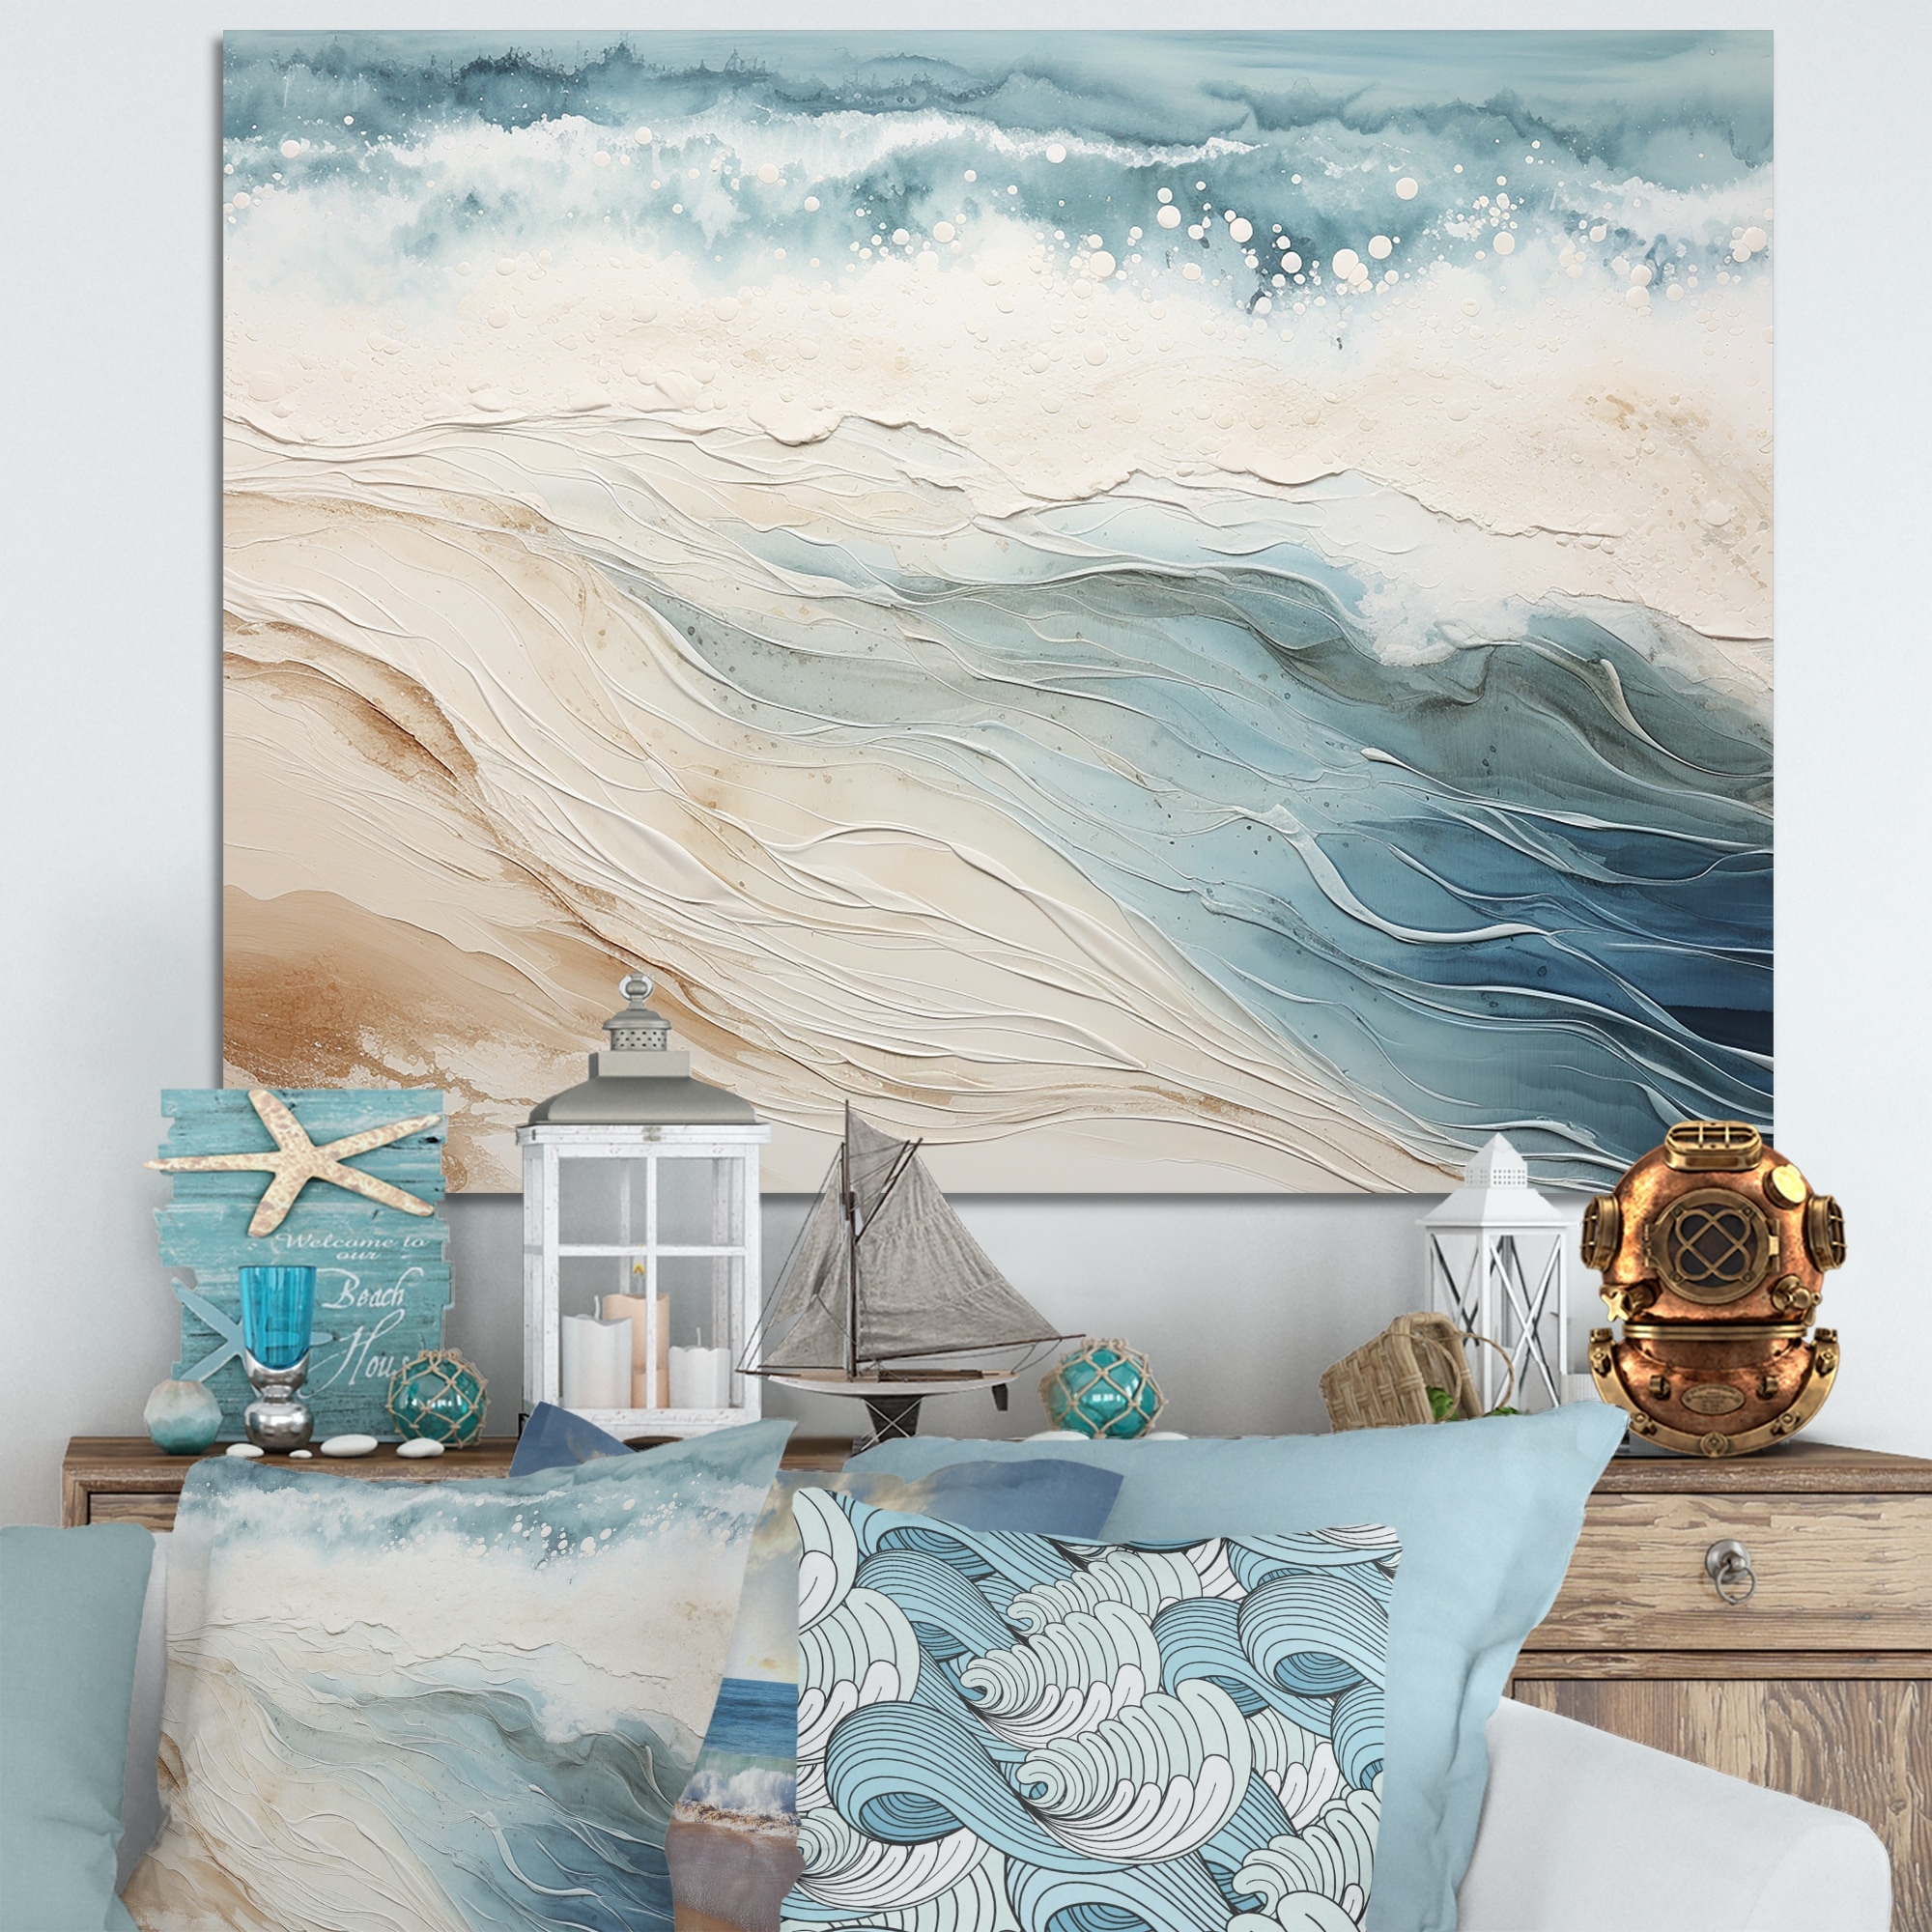 Beach Seashell Bathroom Wall Art Coastal Floral Pictures Wall Decor Flower  Starfish Canvas Painting Modern Home Decorations Artwork for Bedroom Living